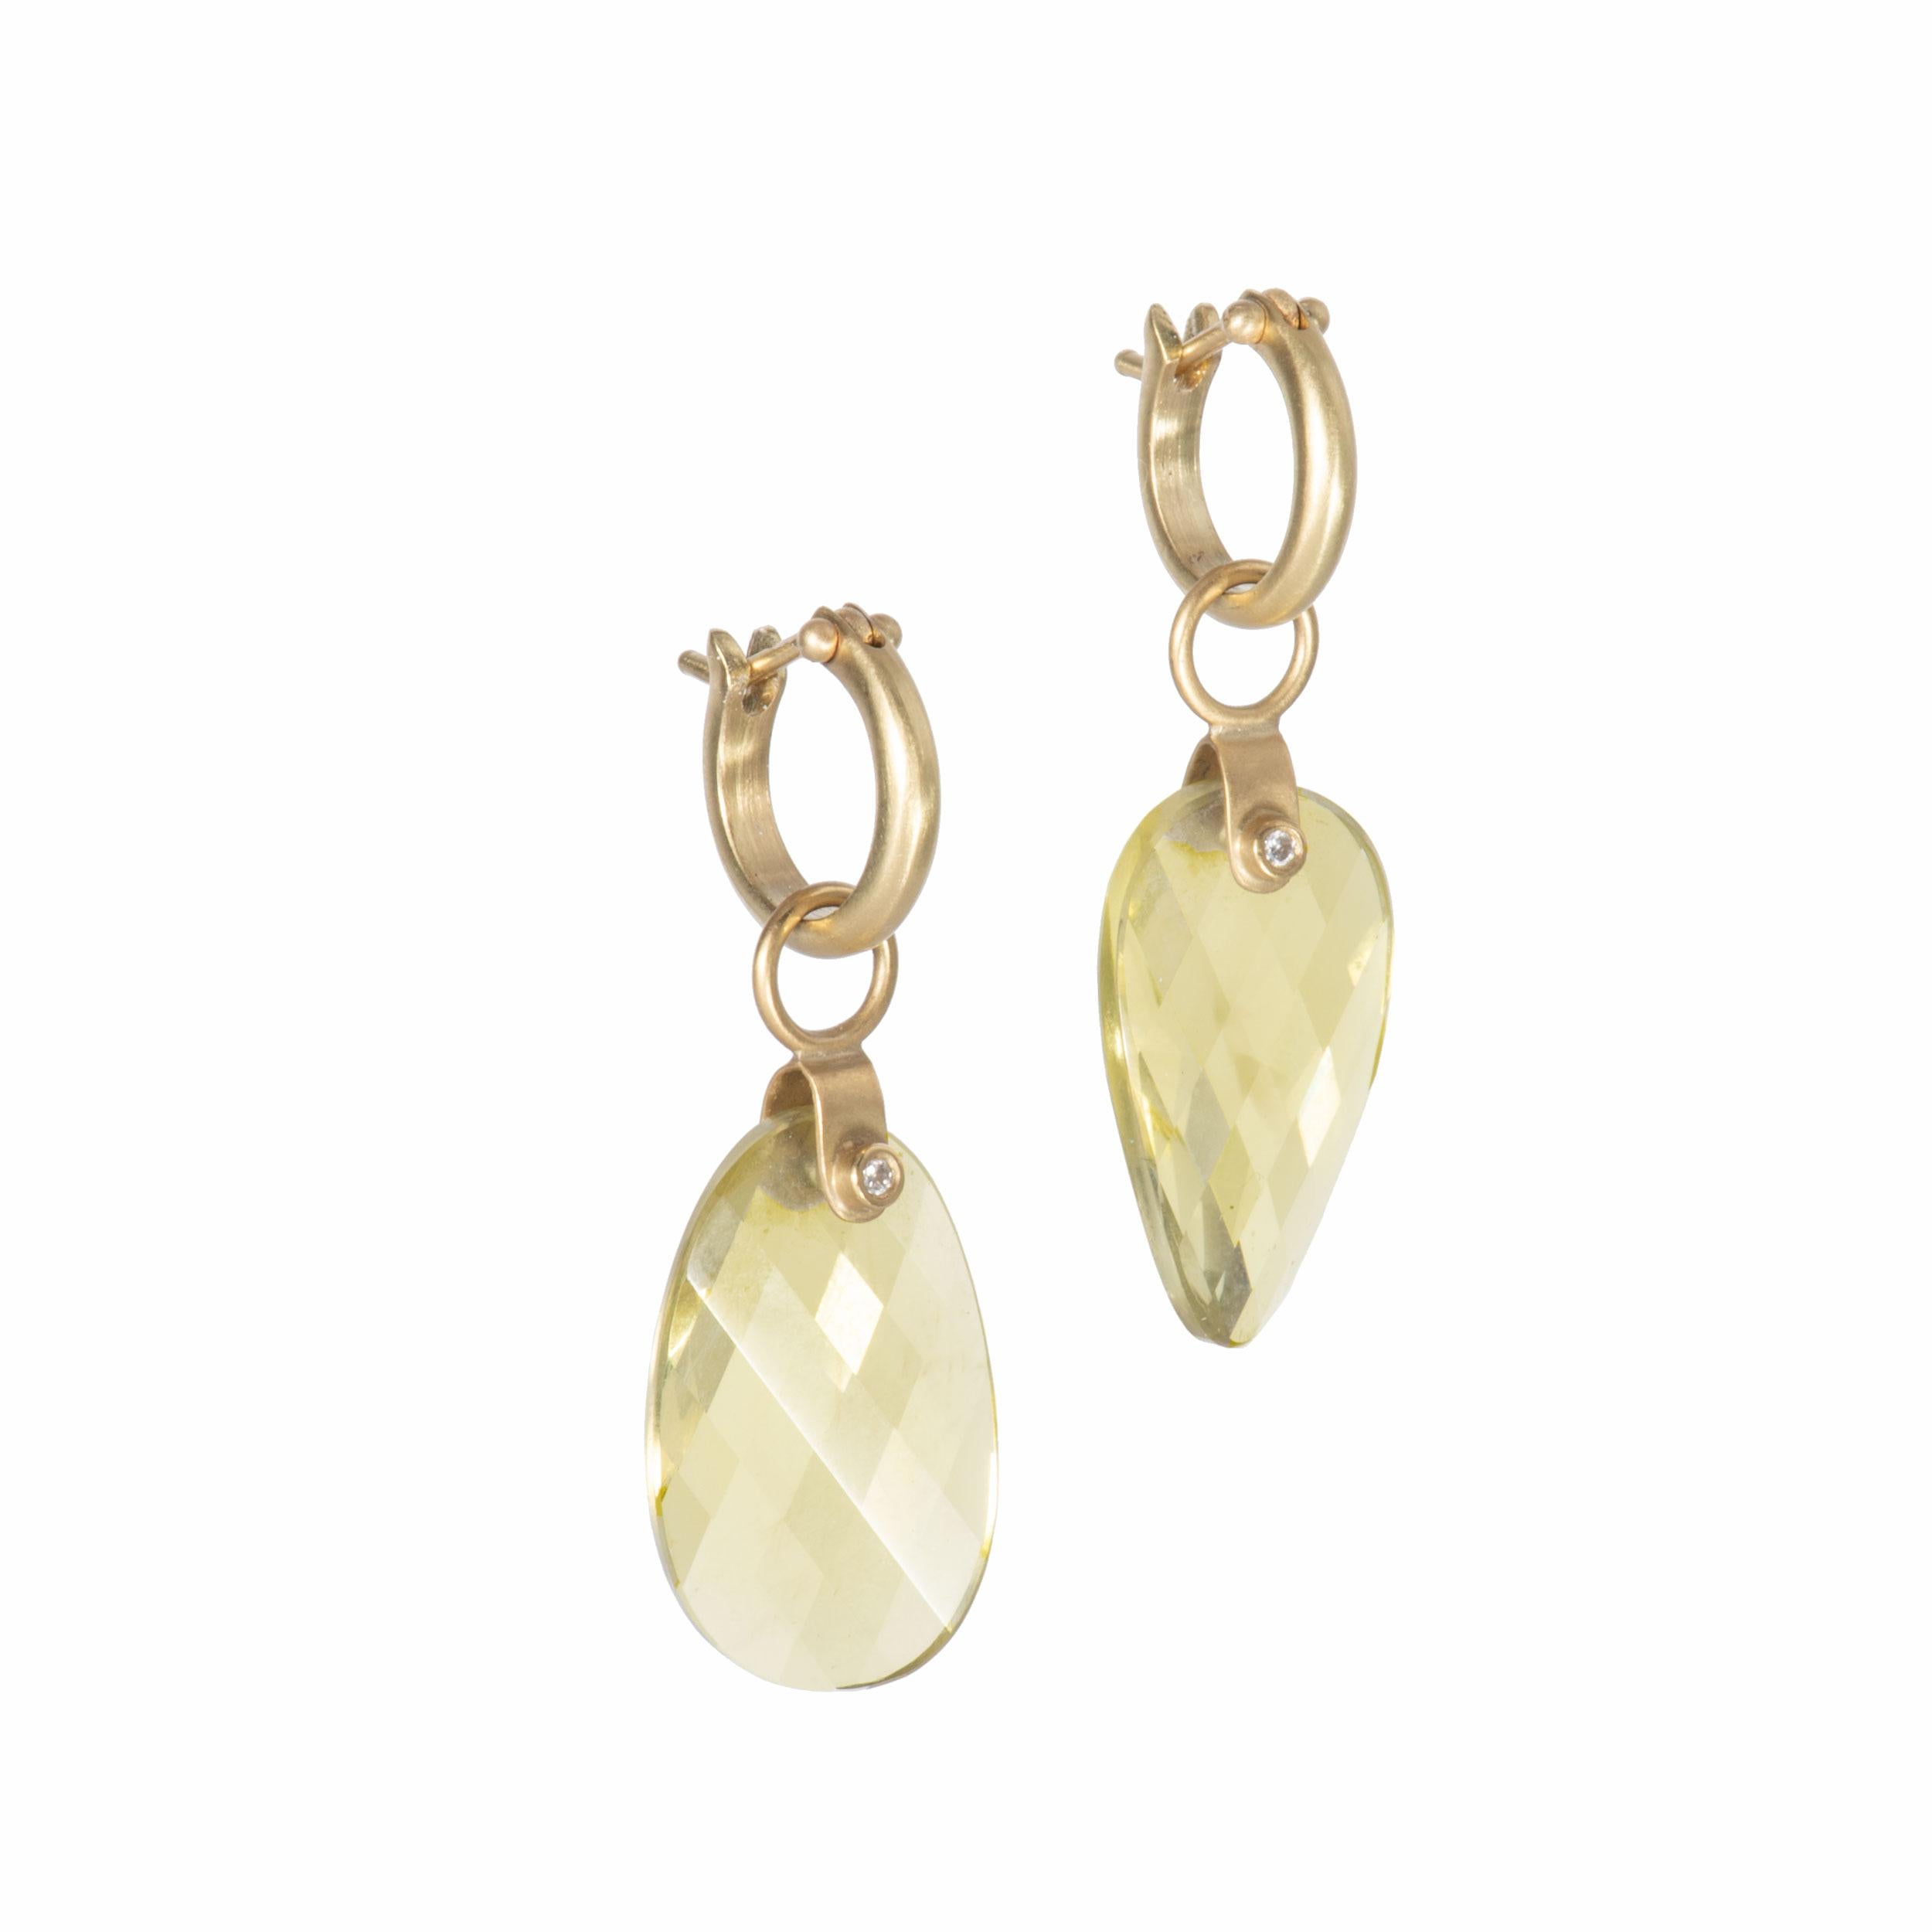 Lemon Quartz Petal Drop Earrings curve to catch the wink and play of light on facets, appearing oval, pointed and heart shaped as they swing from 18k gold stirrup mounts set with .04ctw round white diamonds. Verdant lemon, grapefruit and green grape